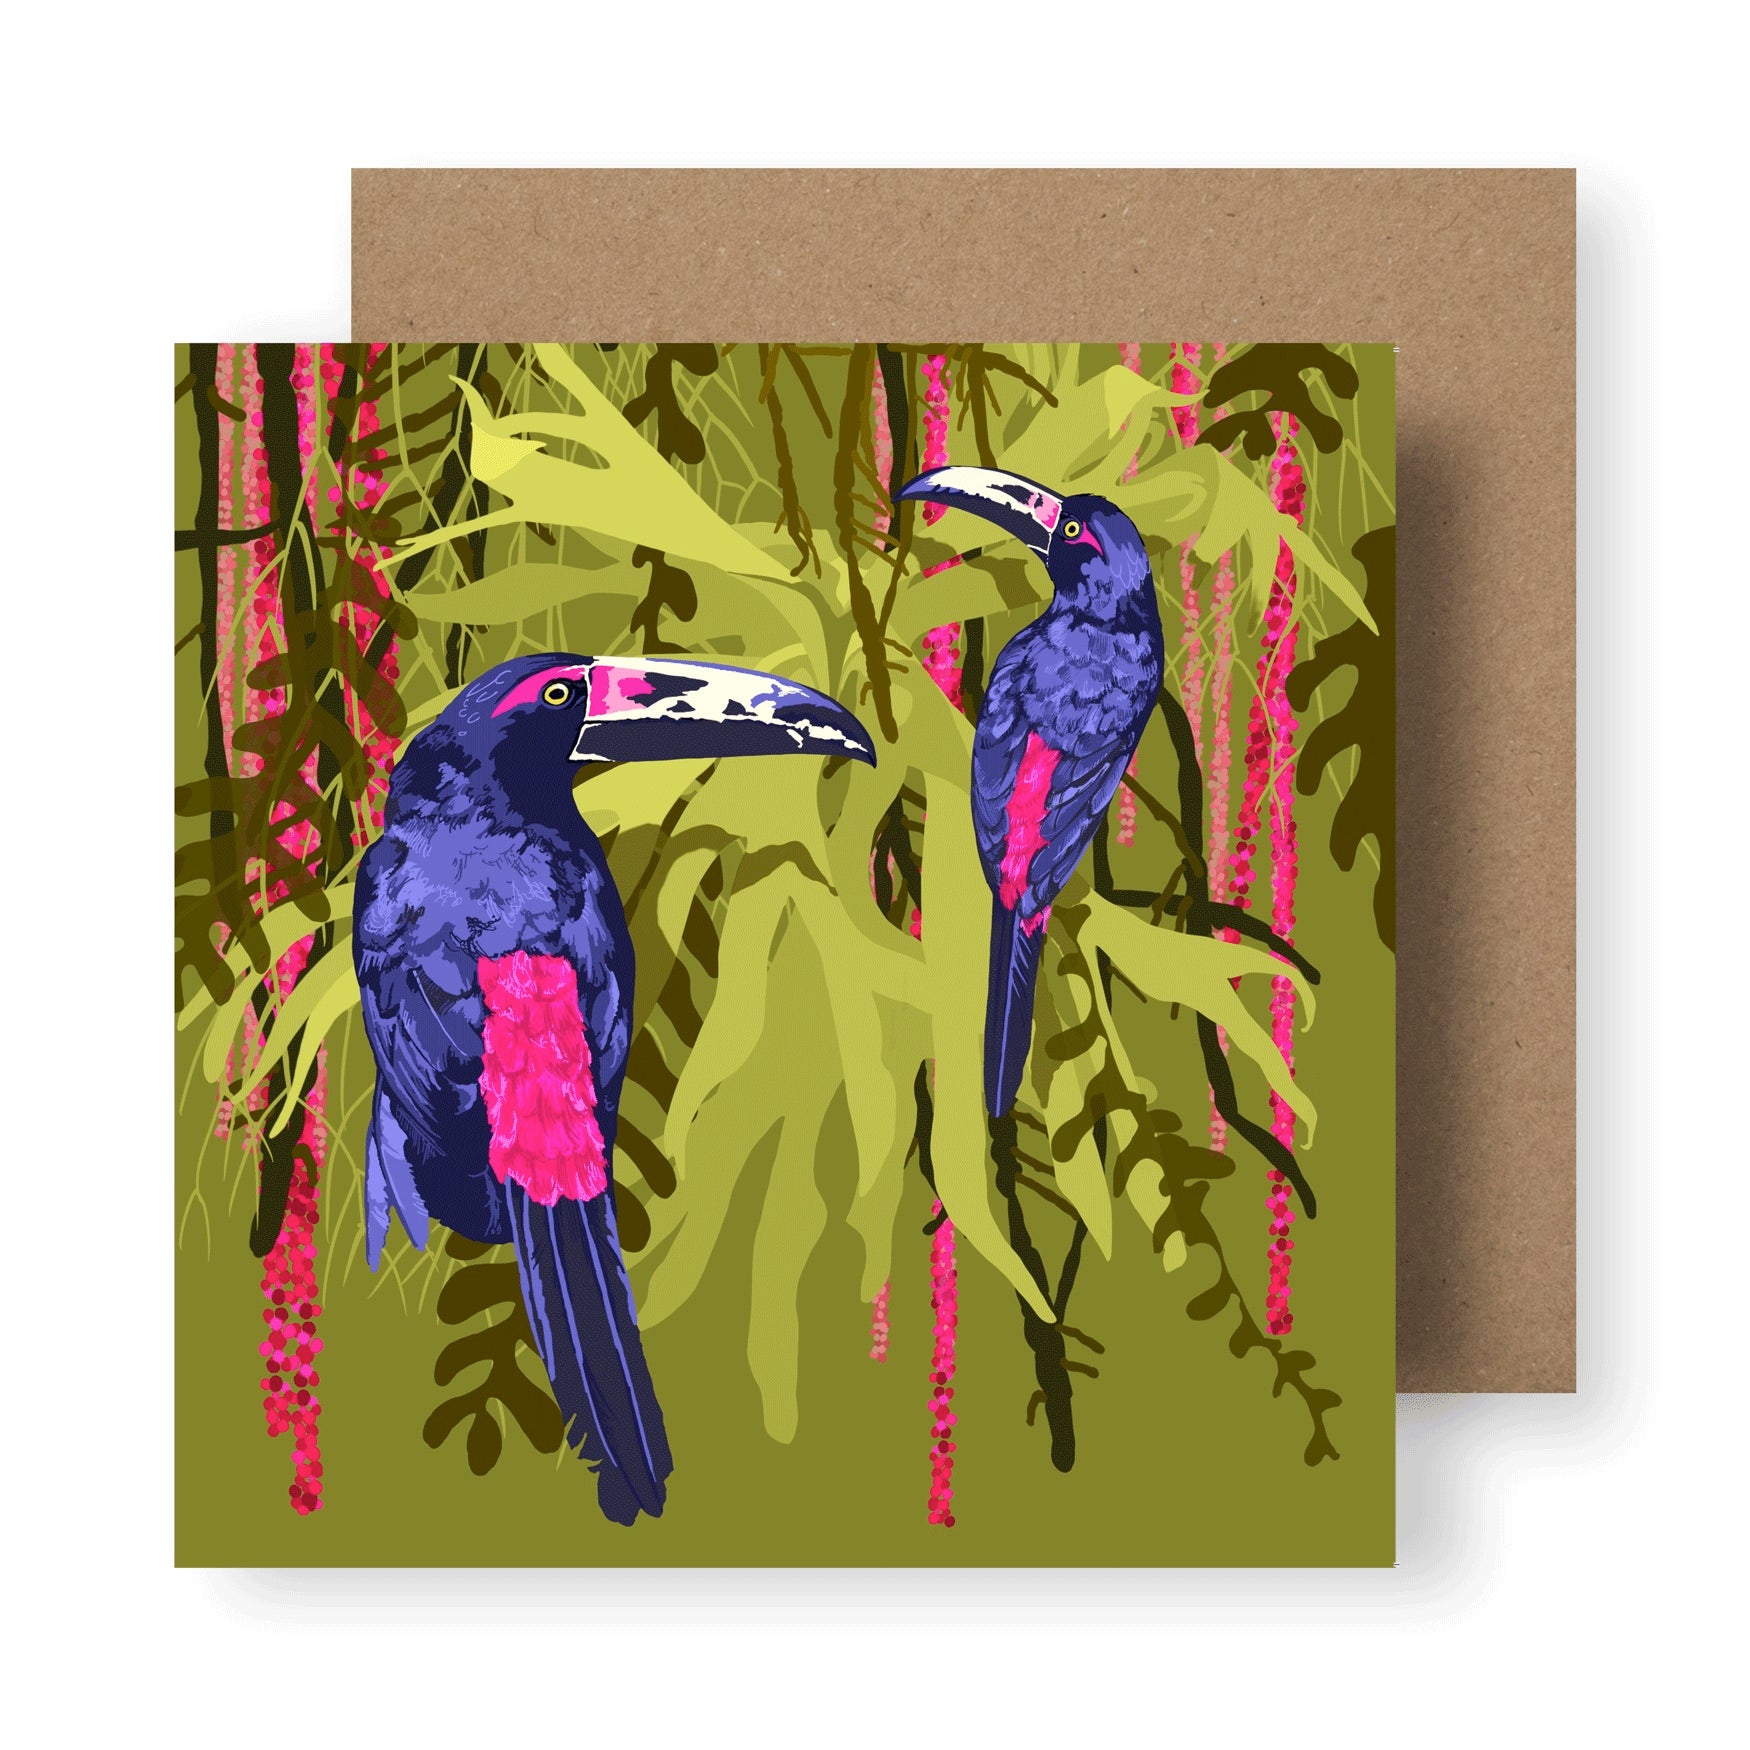 Colourful illustration of two toucans in tropical vegetation